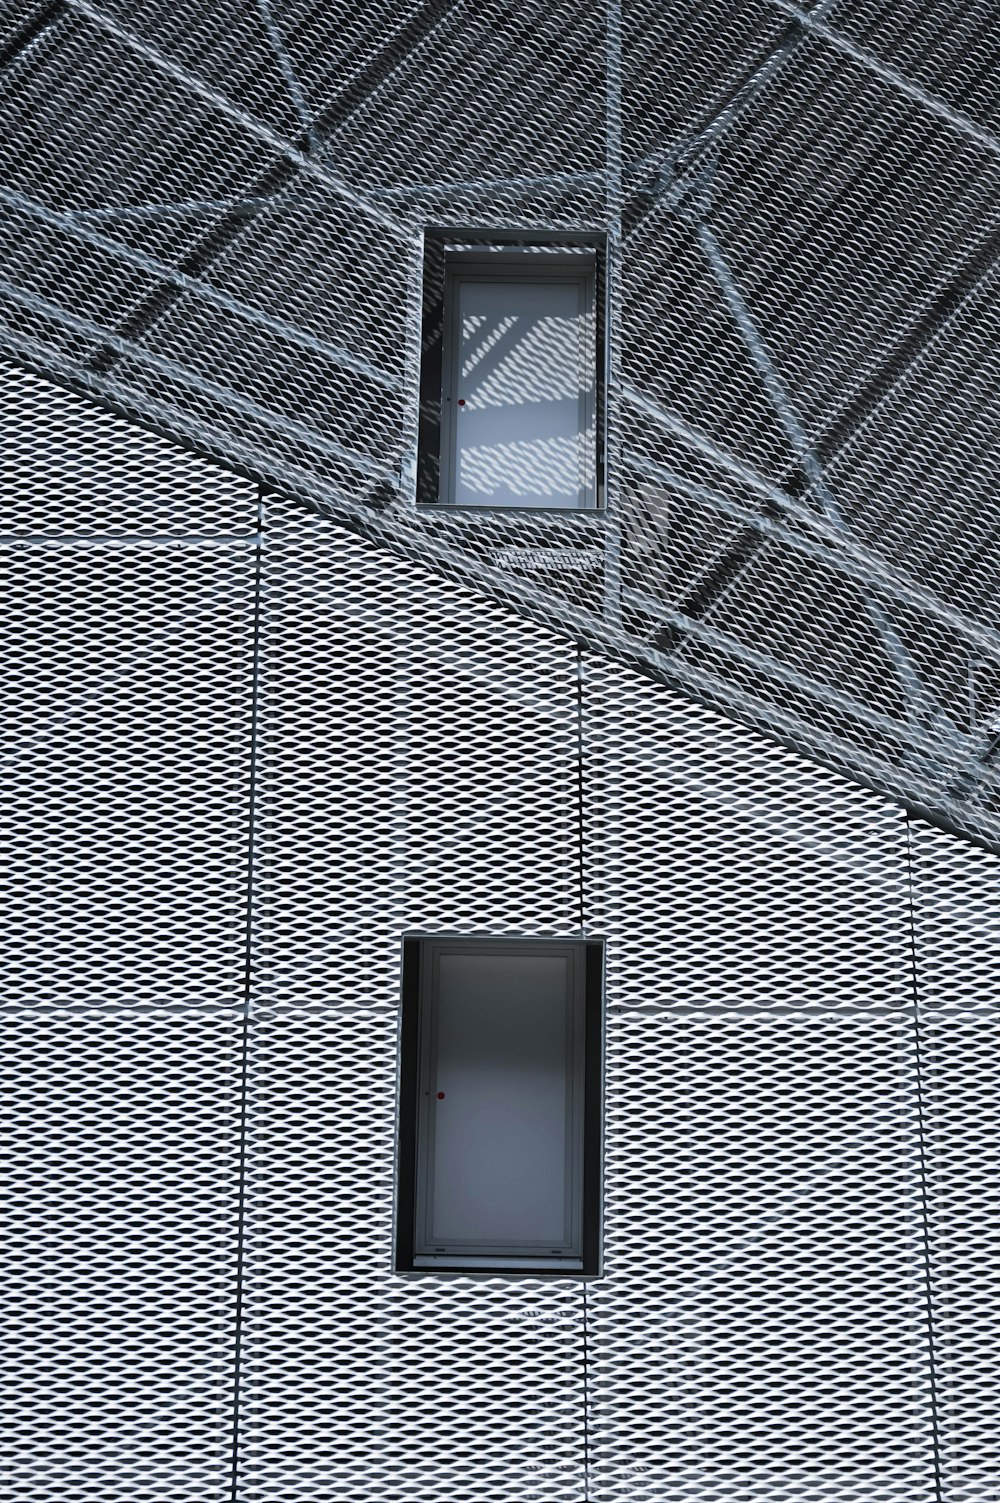 a window in a building with a metal roof